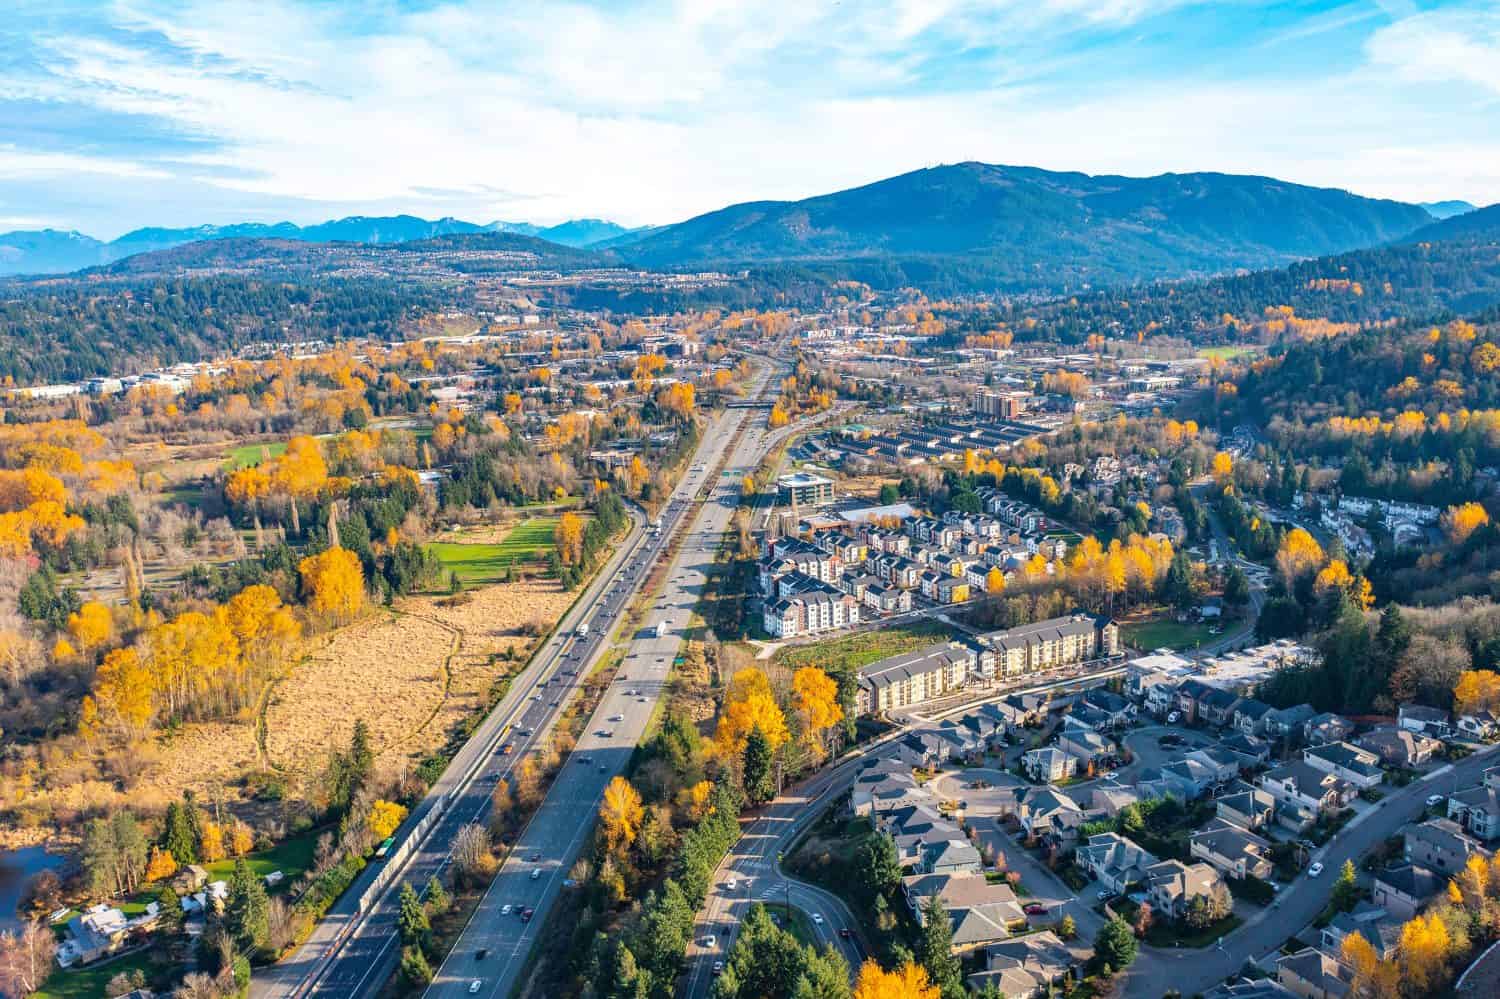 Downtown Issaquah Aerial in the Fall